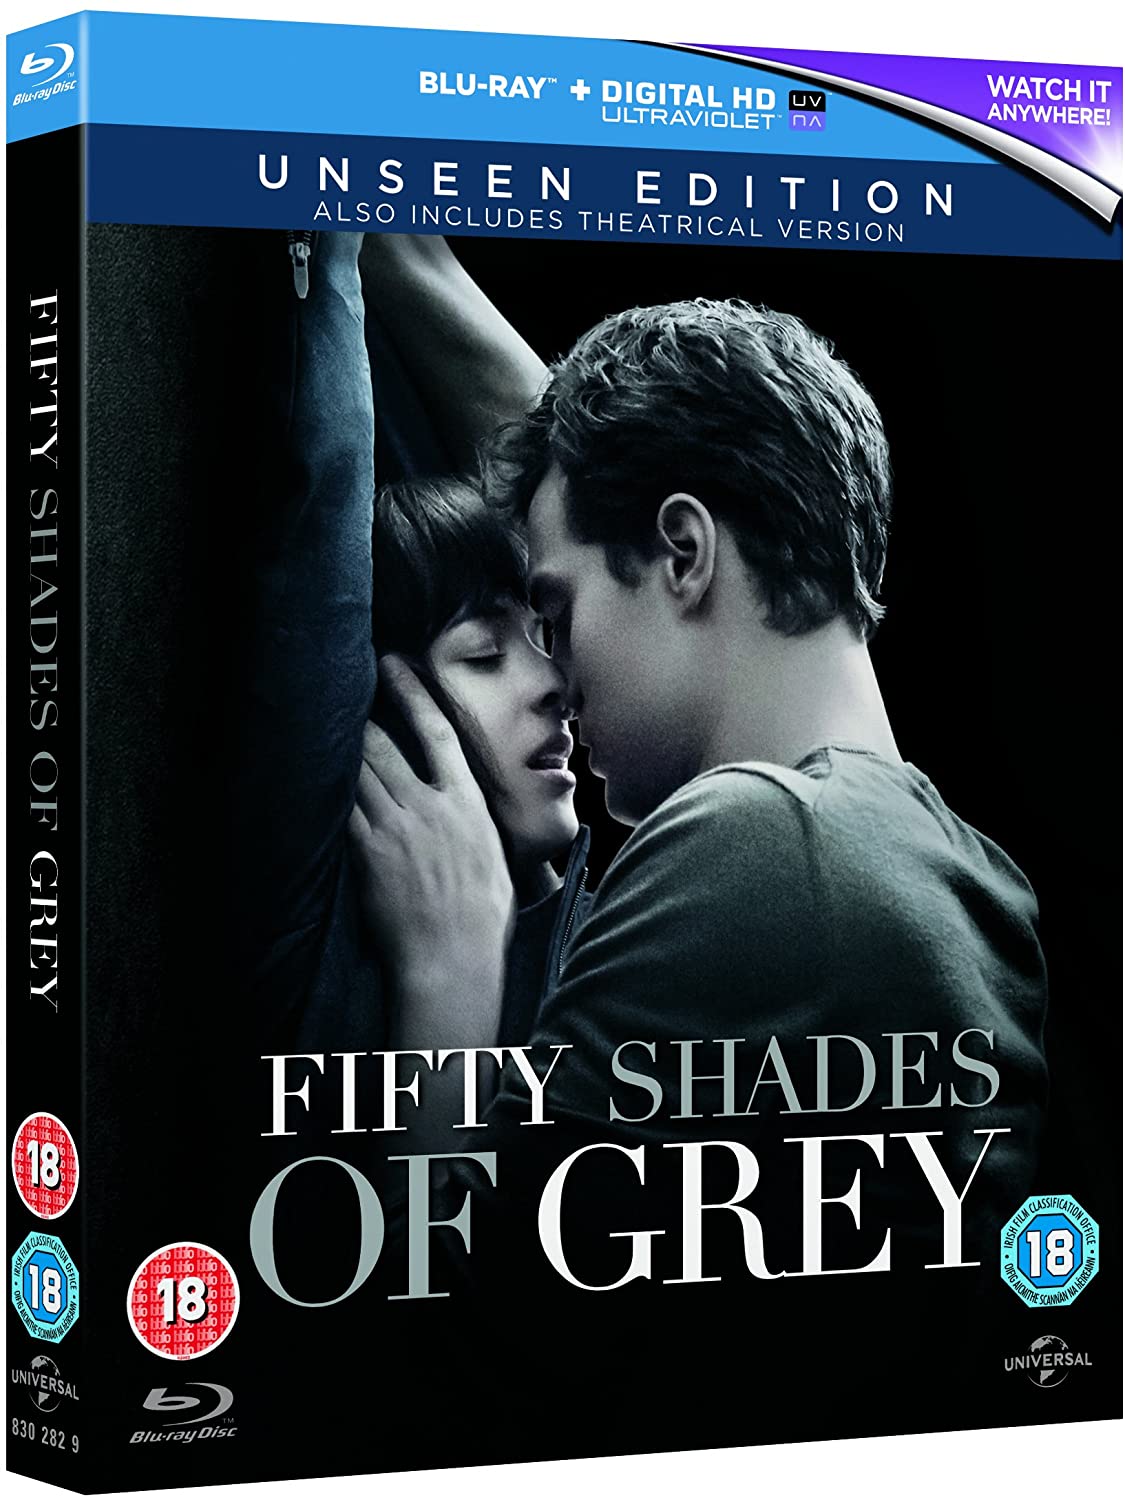 Fifty Shades of Grey [The Unseen Edition] [2015] (Blu-ray)